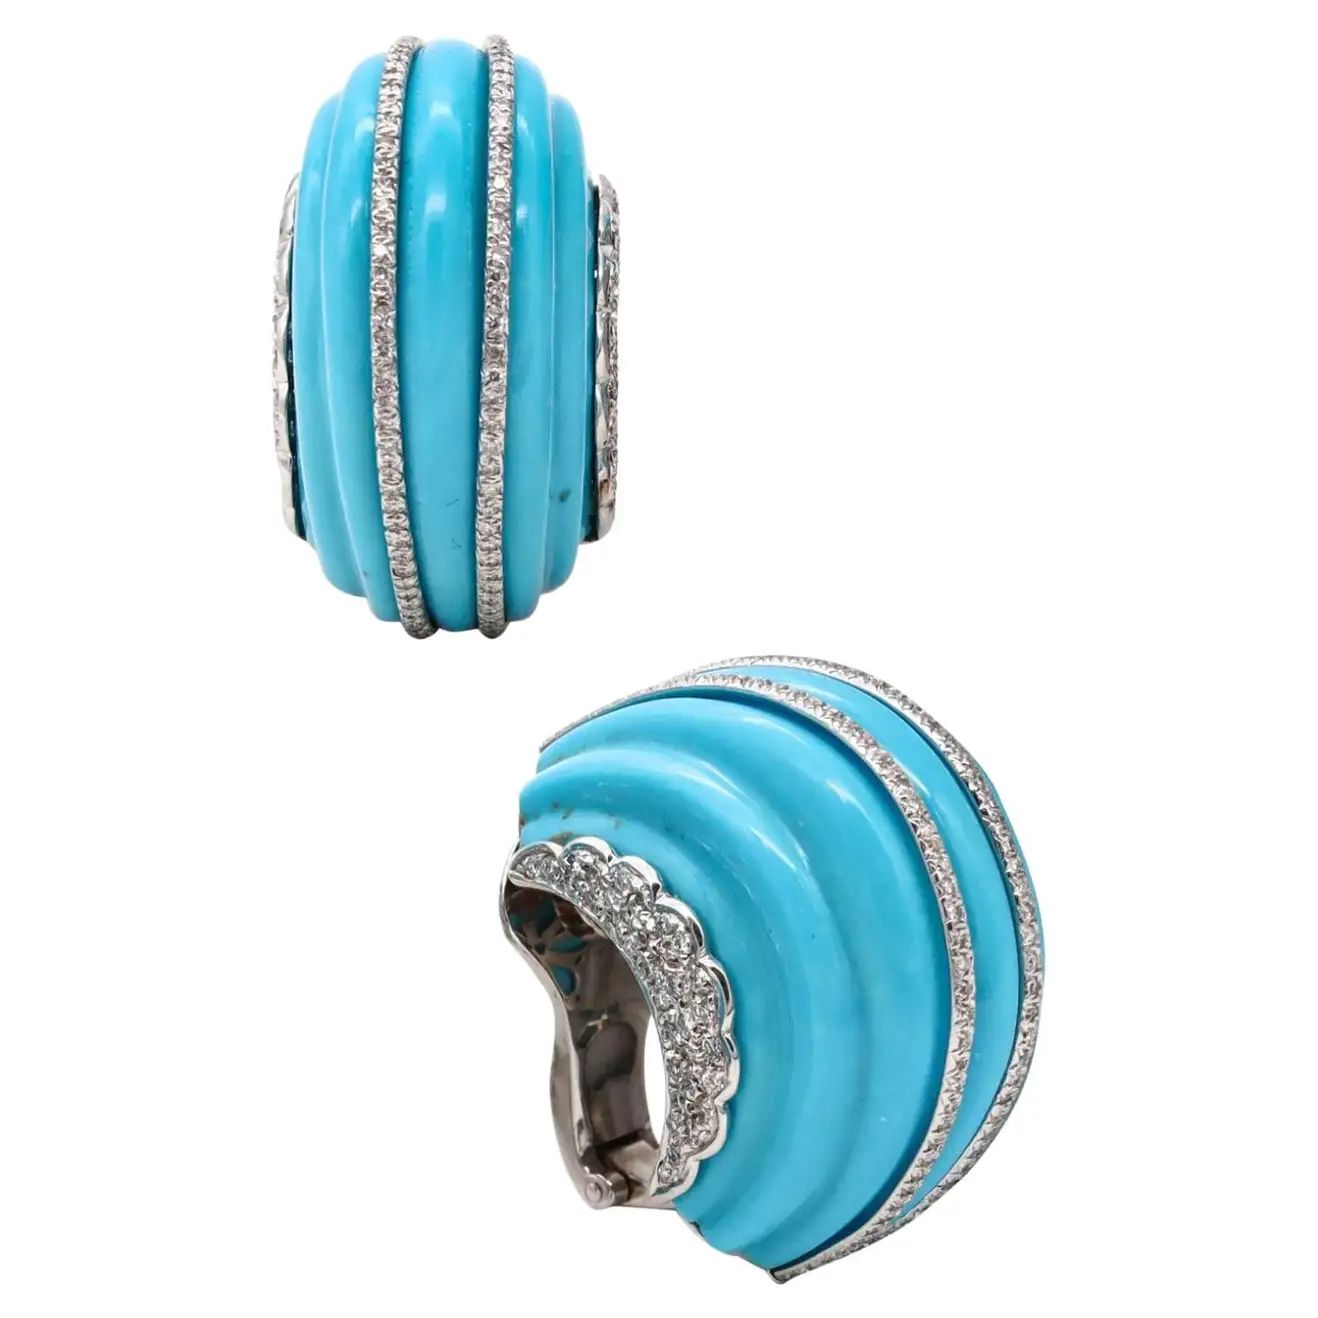 Fred Leighton New York Platinum Fluted Earrings 2.72Cts Diamonds & Turquoises | 1stDibs